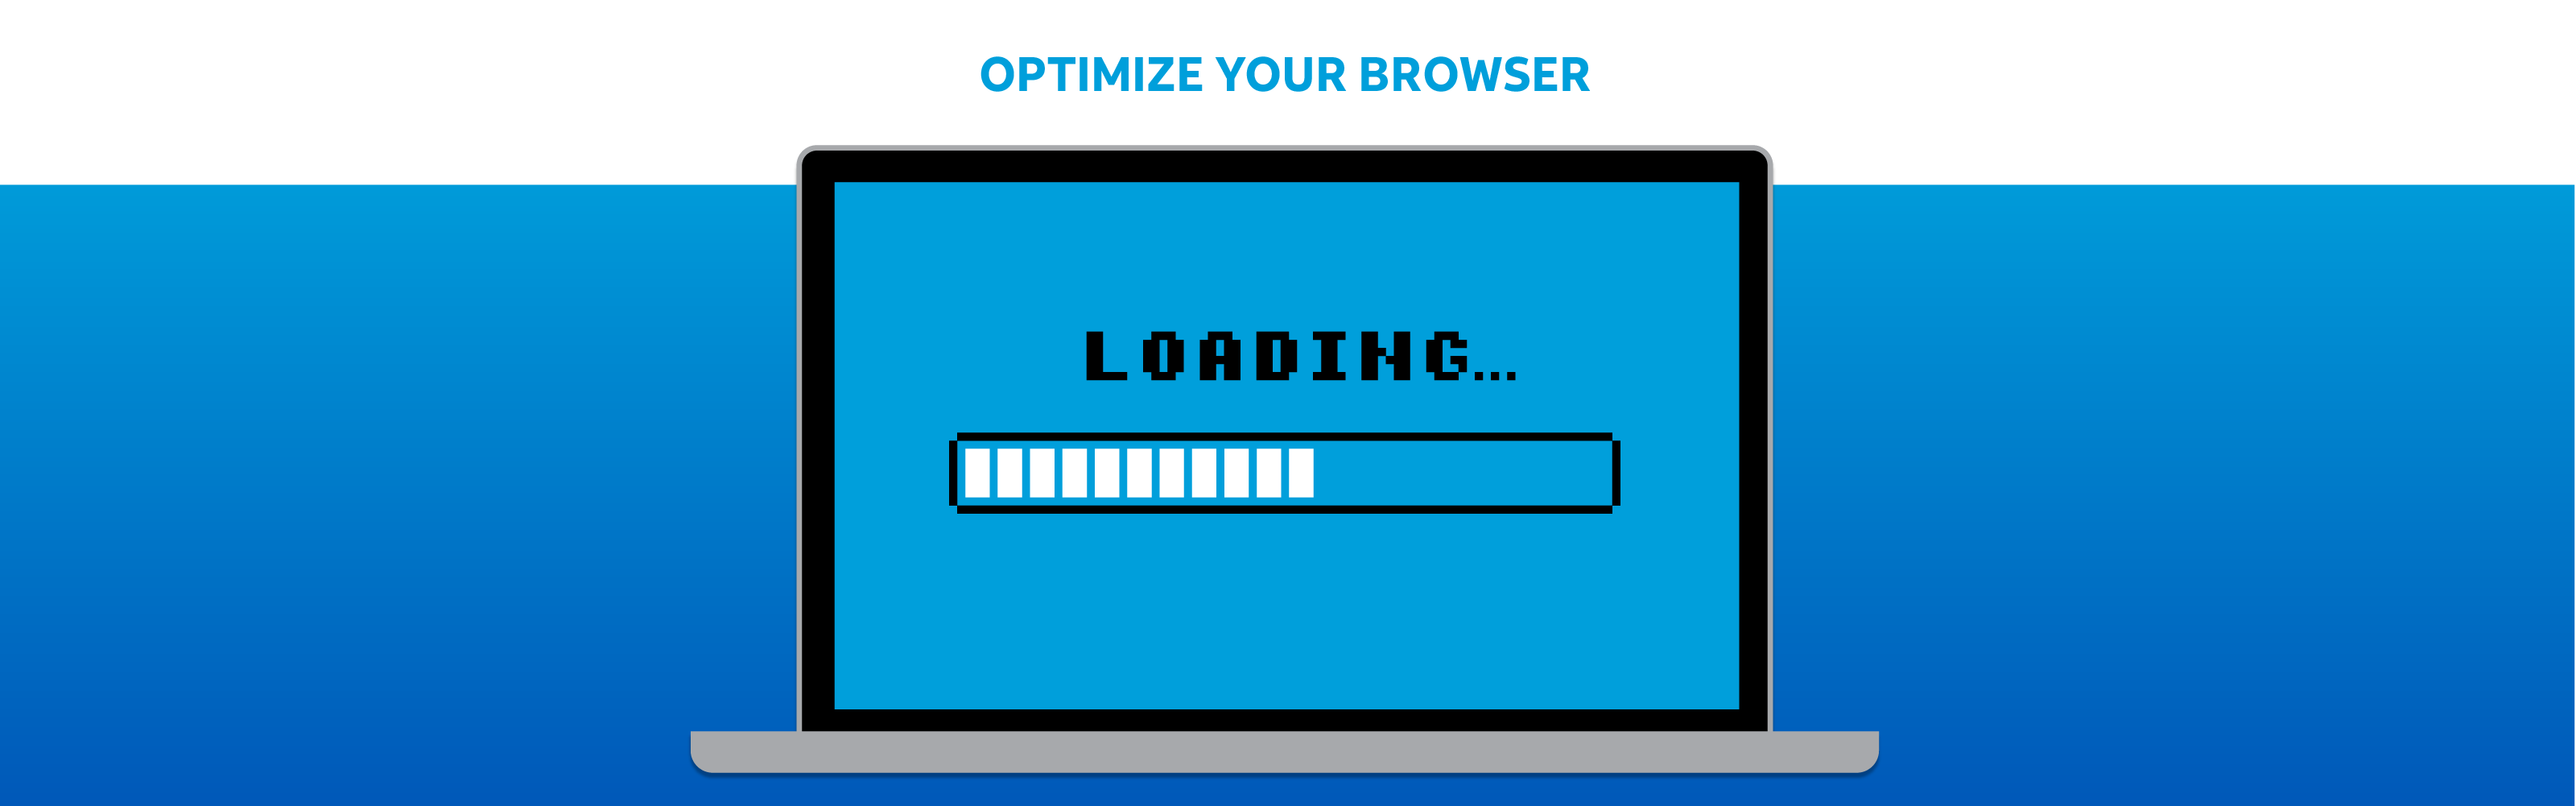 Image of a laptop showing a browser Loading... screen